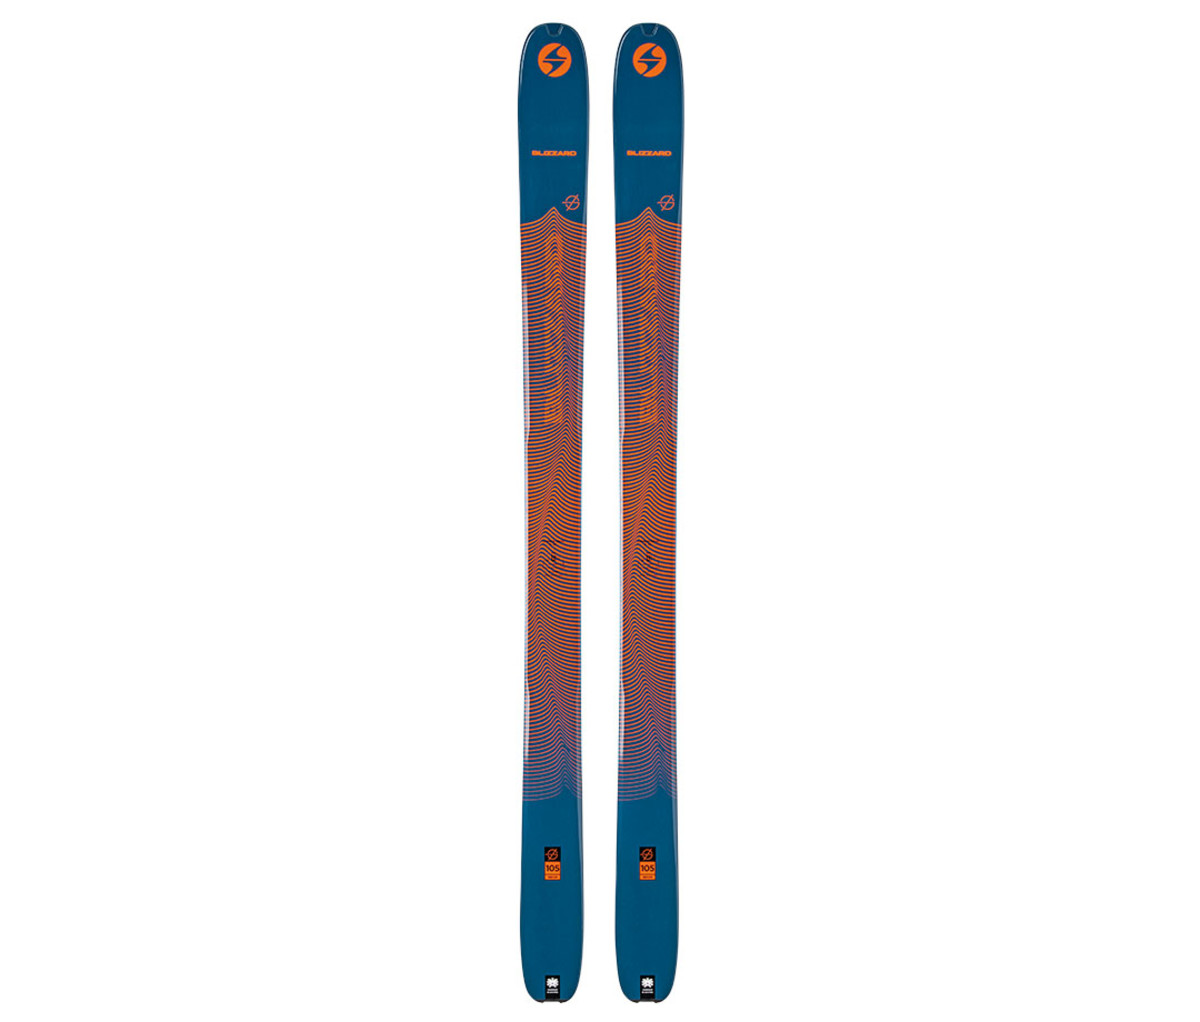 The Best Skis for Groomers, Powder, and All-mountain: 2019-20 - Men's ...